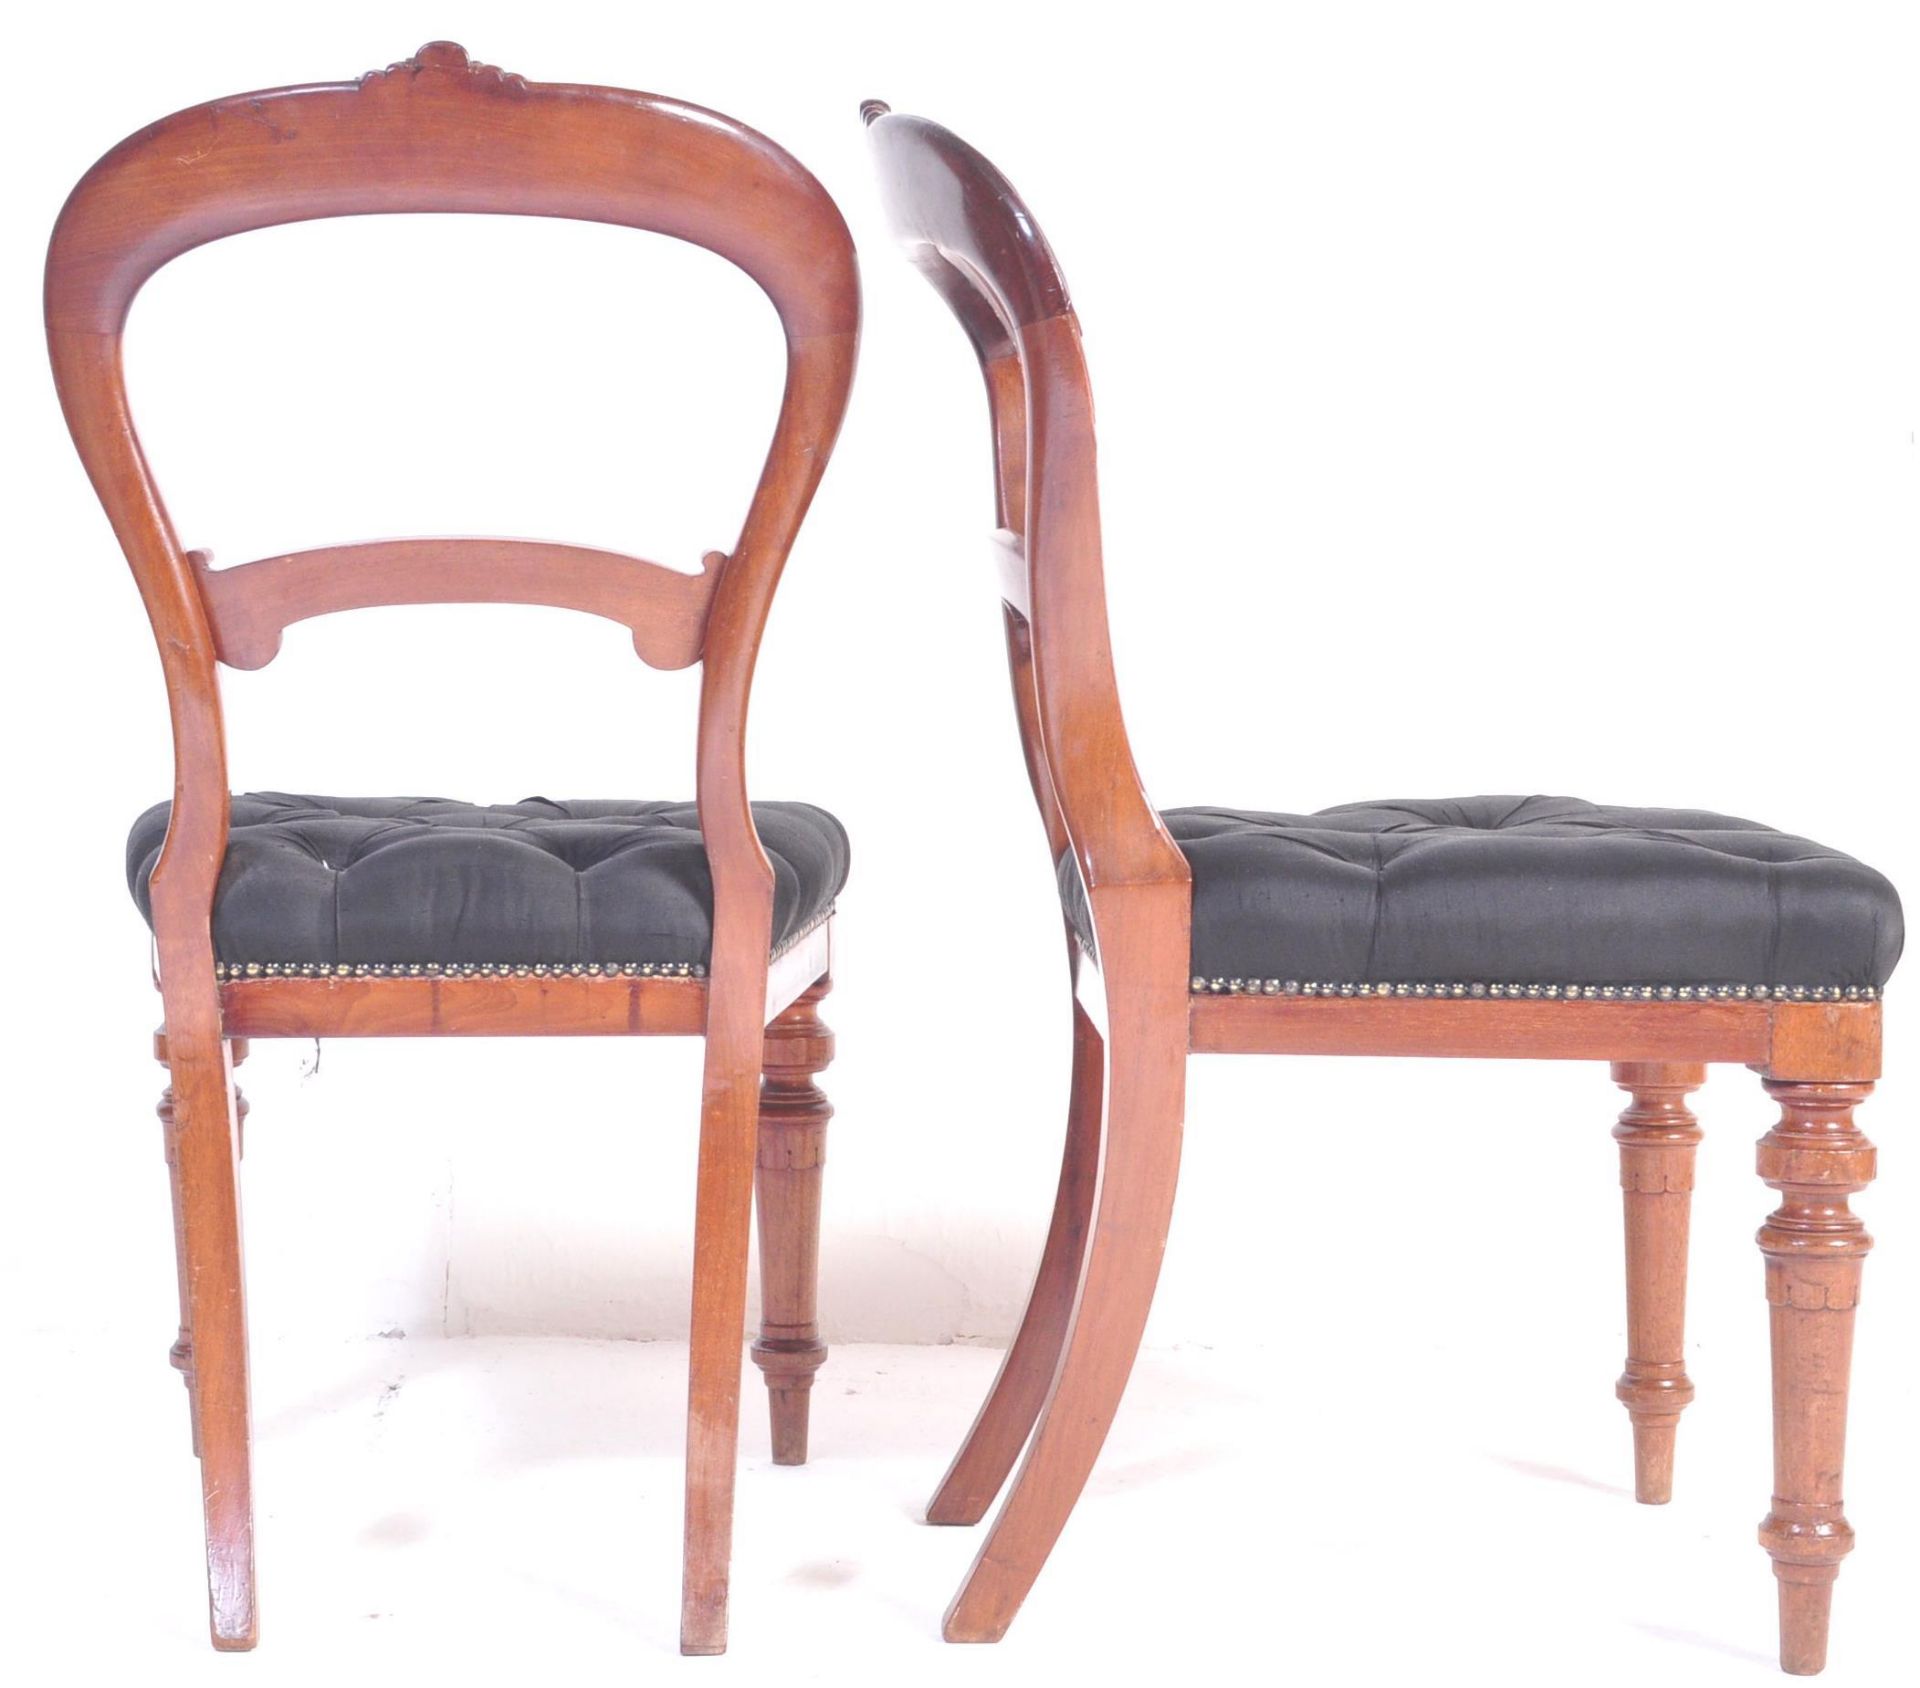 PAIR OF 19TH CENTURY VICTORIAN MAHOGANY DINING CHAIRS - Image 3 of 8